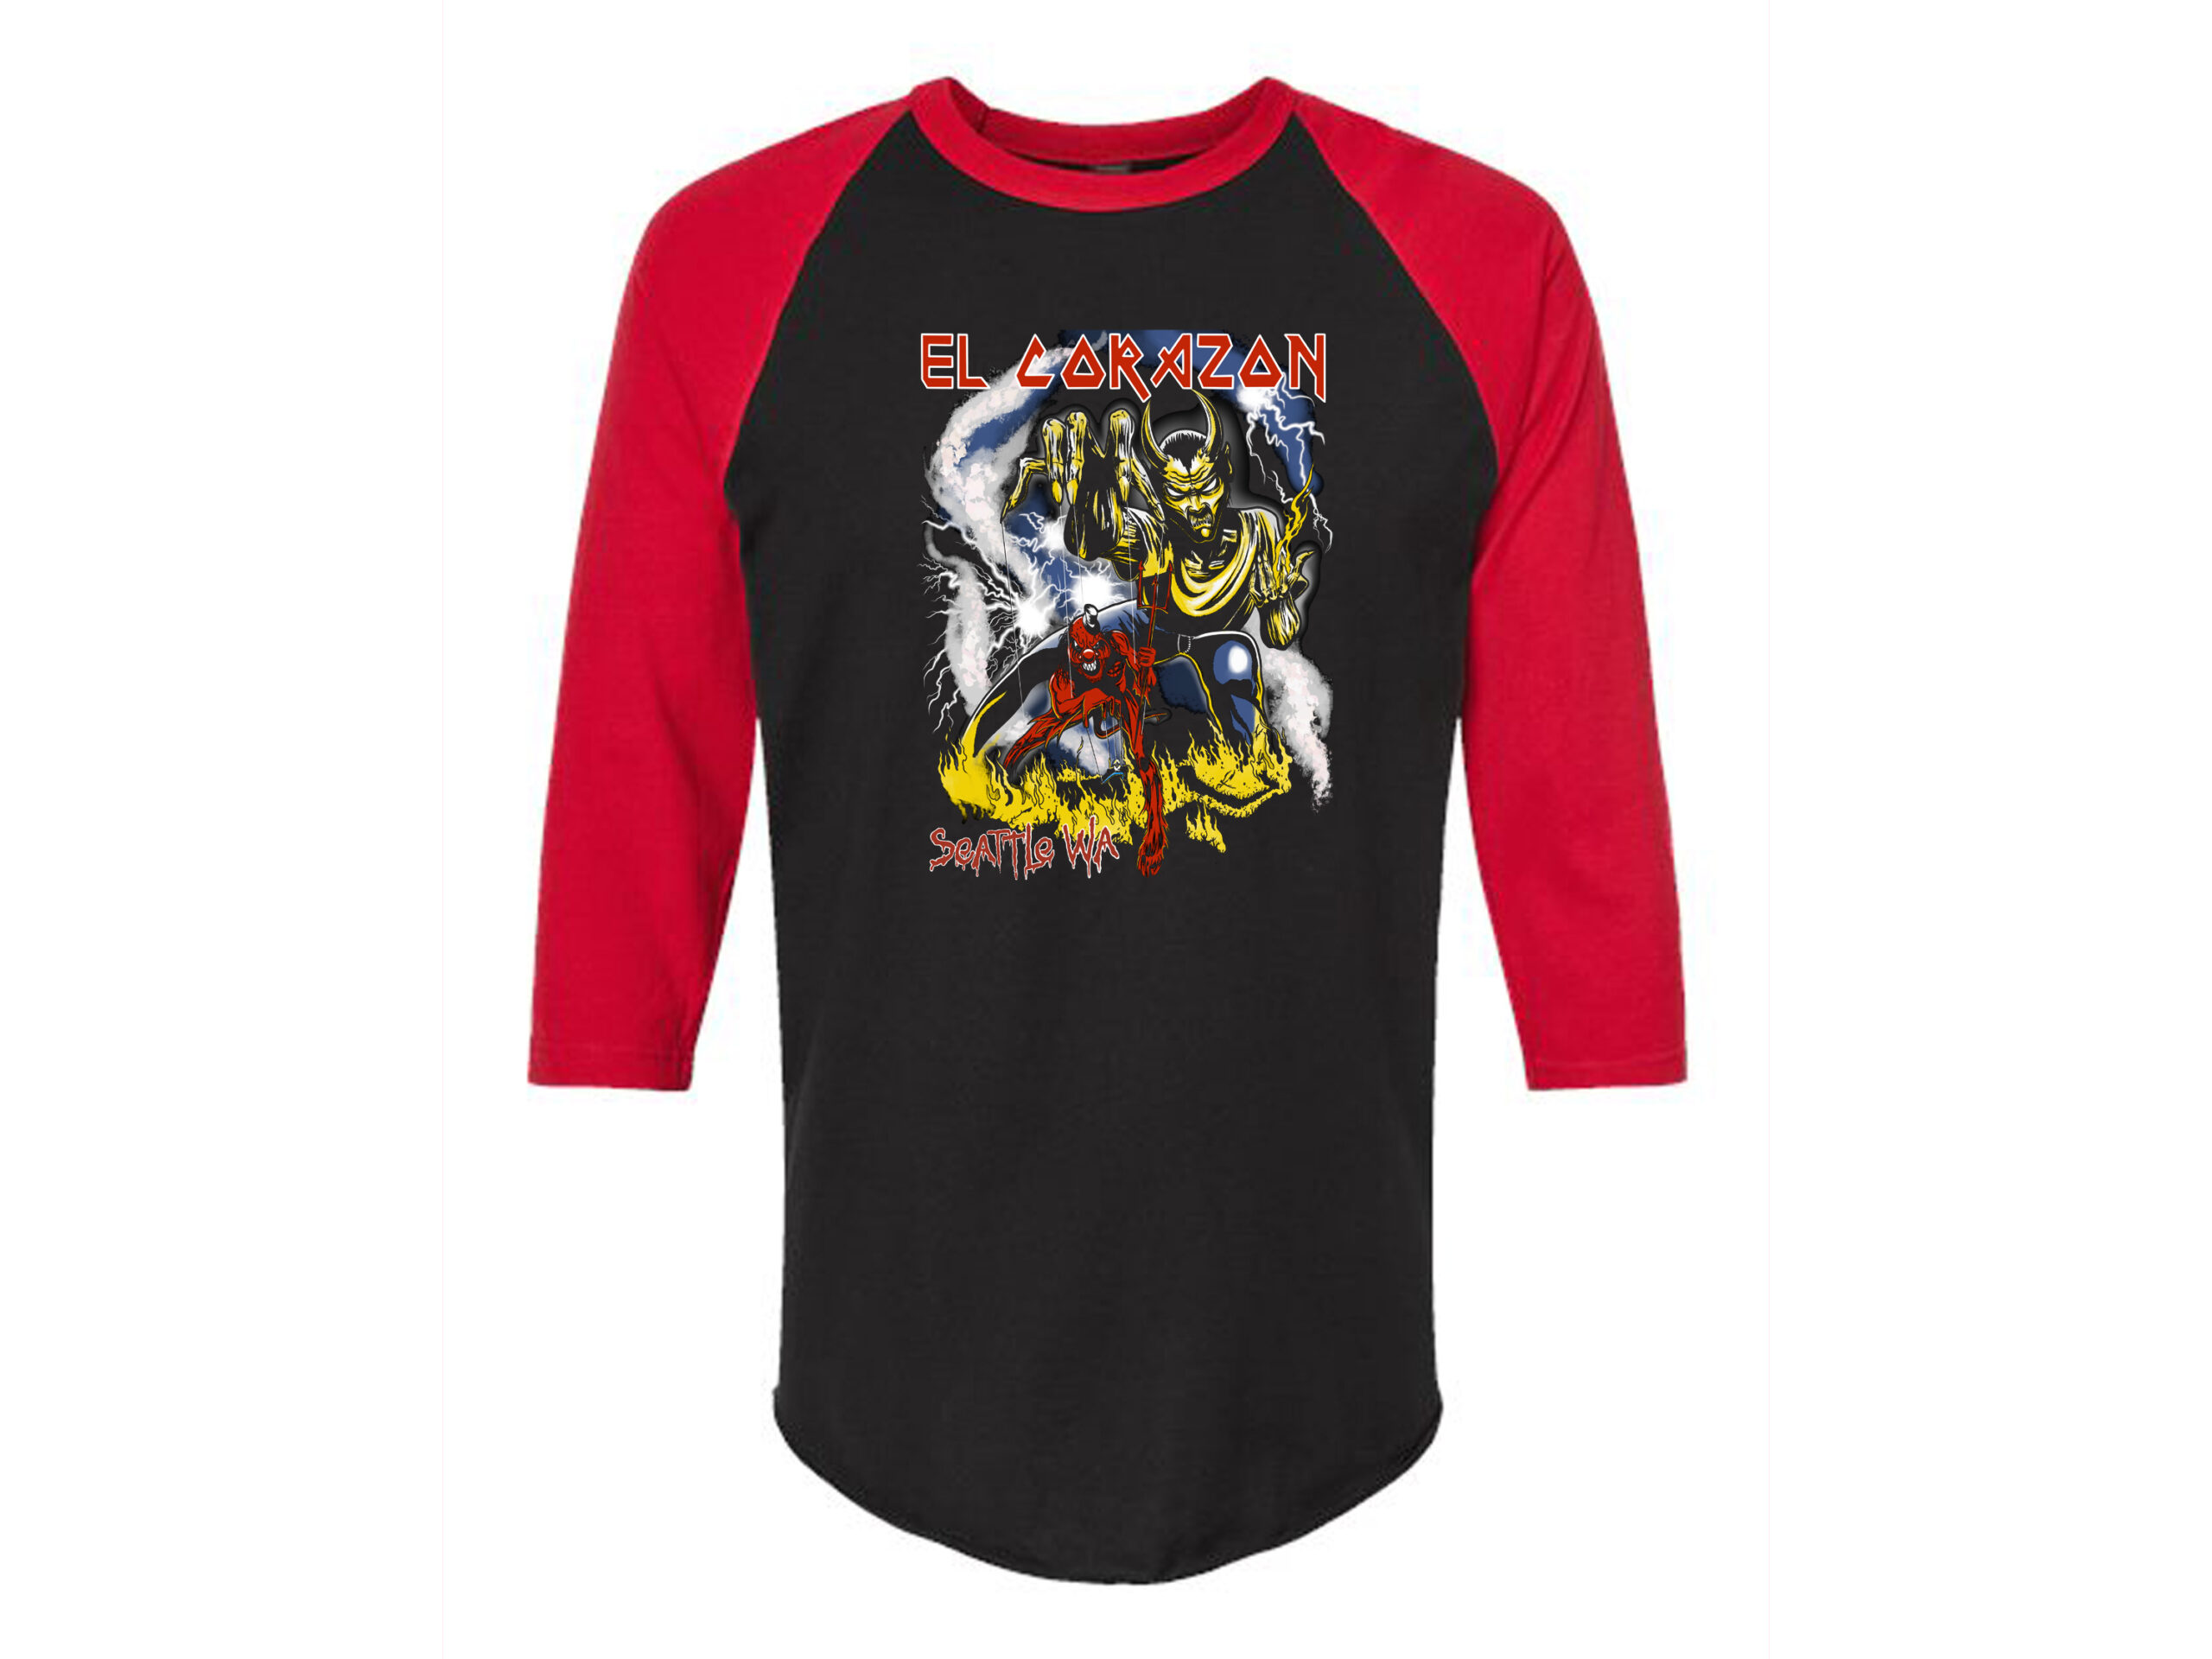 Limited Edition ‘Eddie’ tees and hoodies for El Corazon and Funhouse!